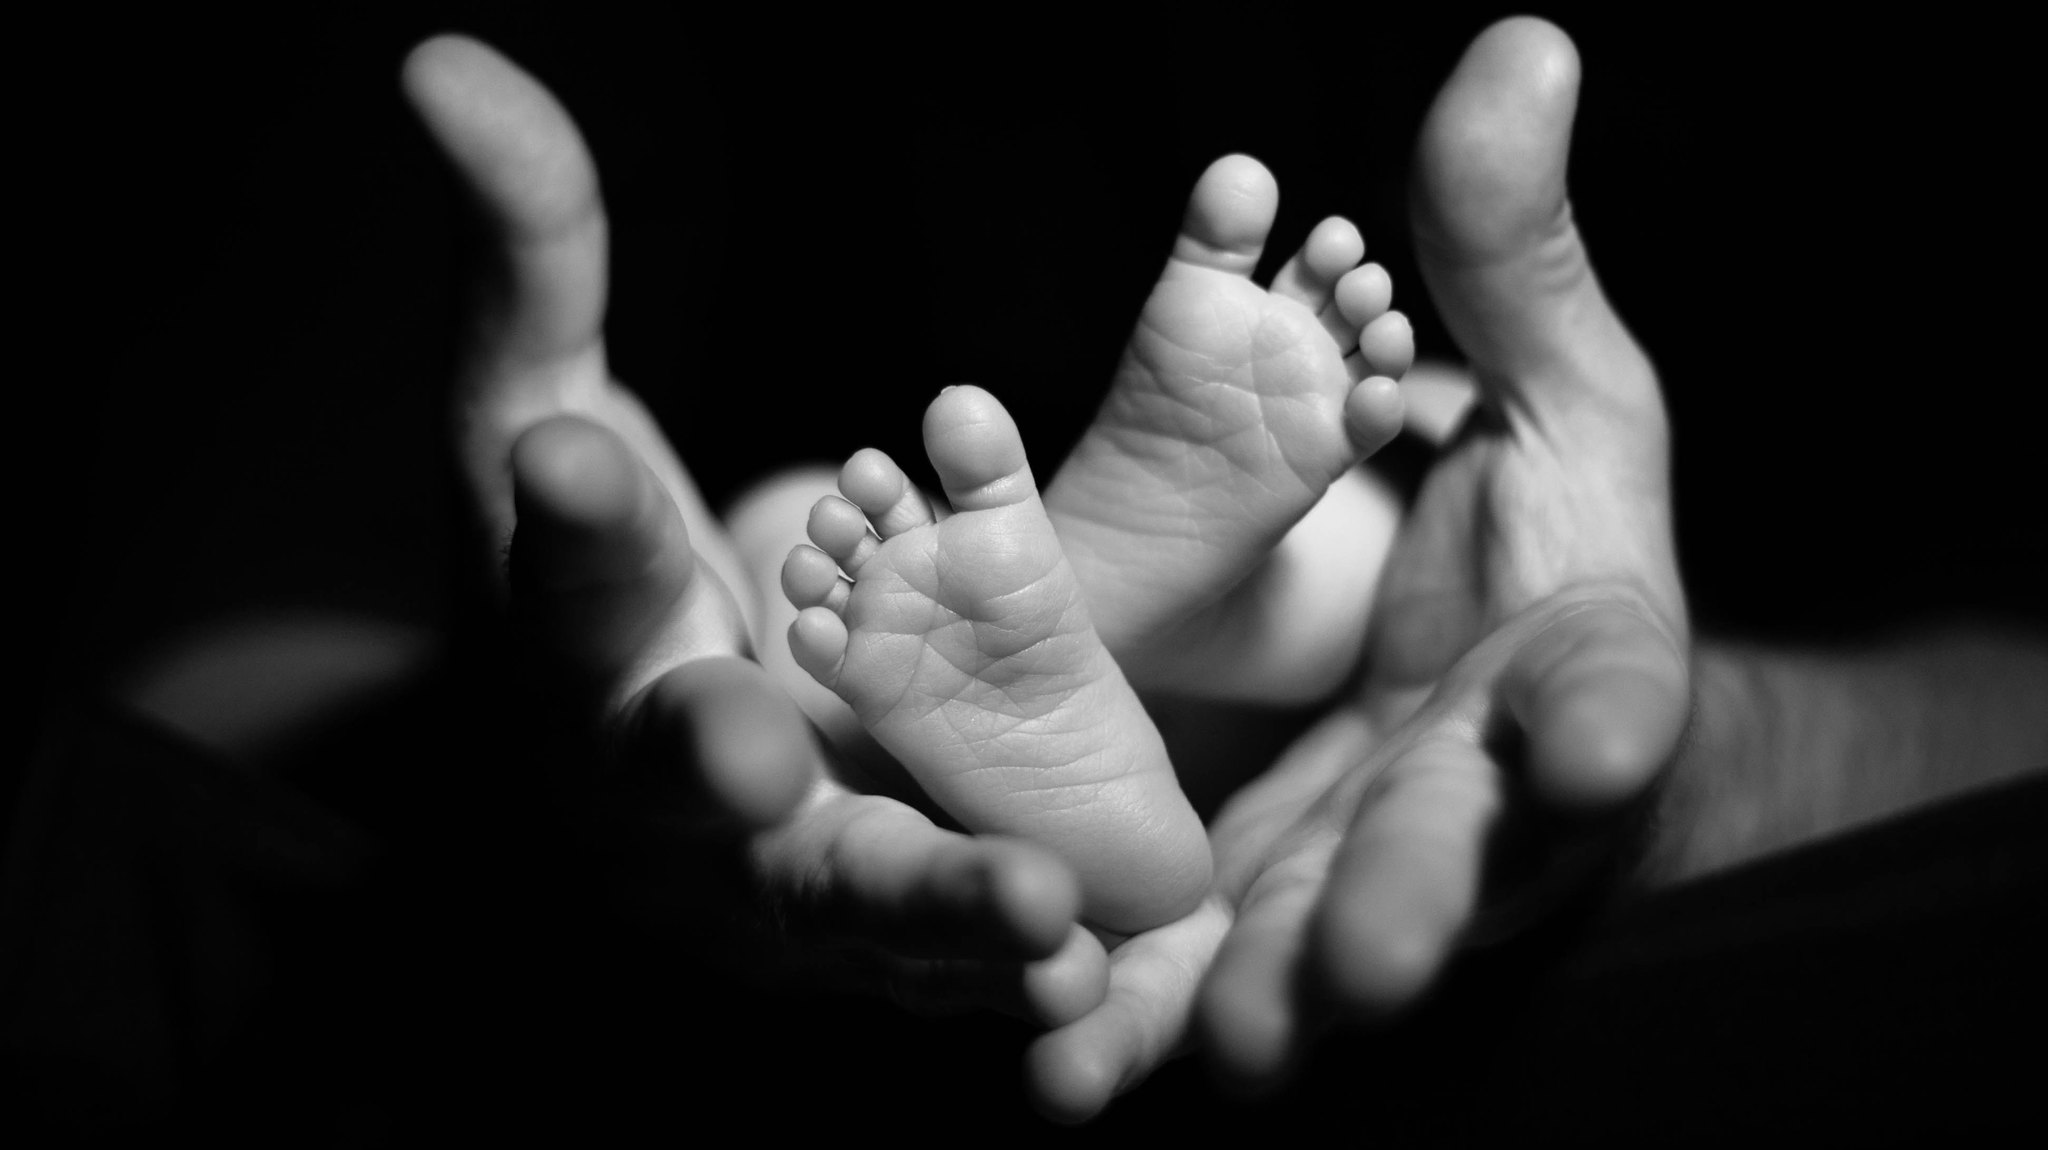 An adult holding a baby's feet in their palm